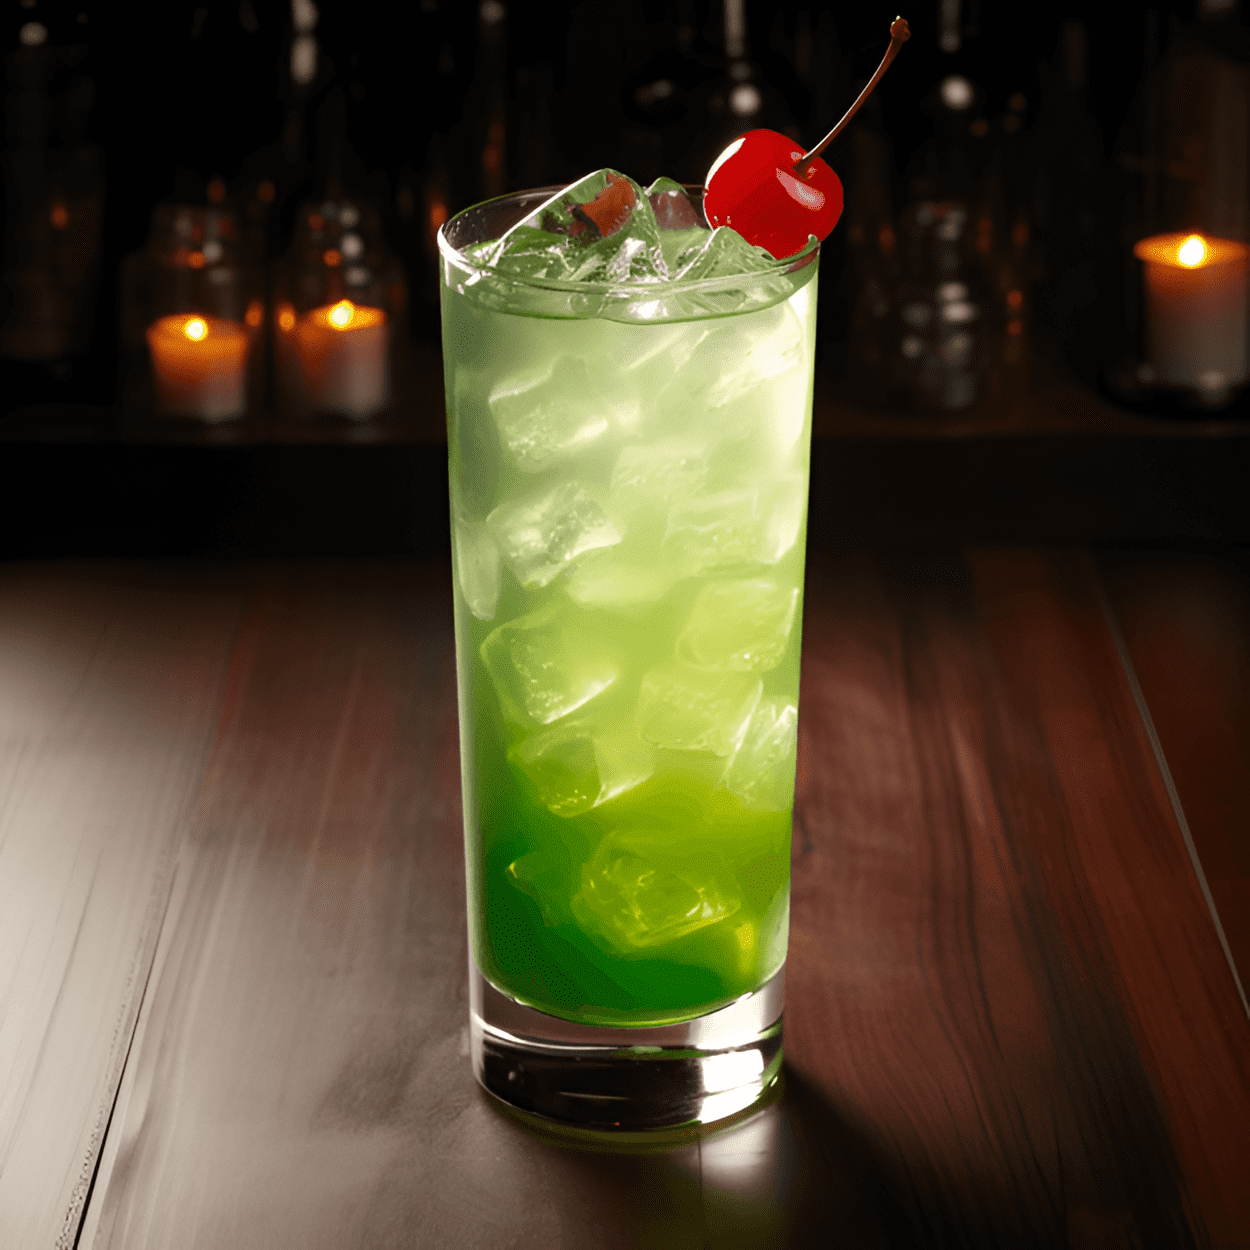 Green Monster Cocktail Recipe - The Green Monster is a sweet and tangy cocktail with a hint of sourness. The fruity flavors of pineapple and lime are balanced by the sweetness of the melon liqueur, creating a refreshing and vibrant taste that is perfect for a hot summer day.